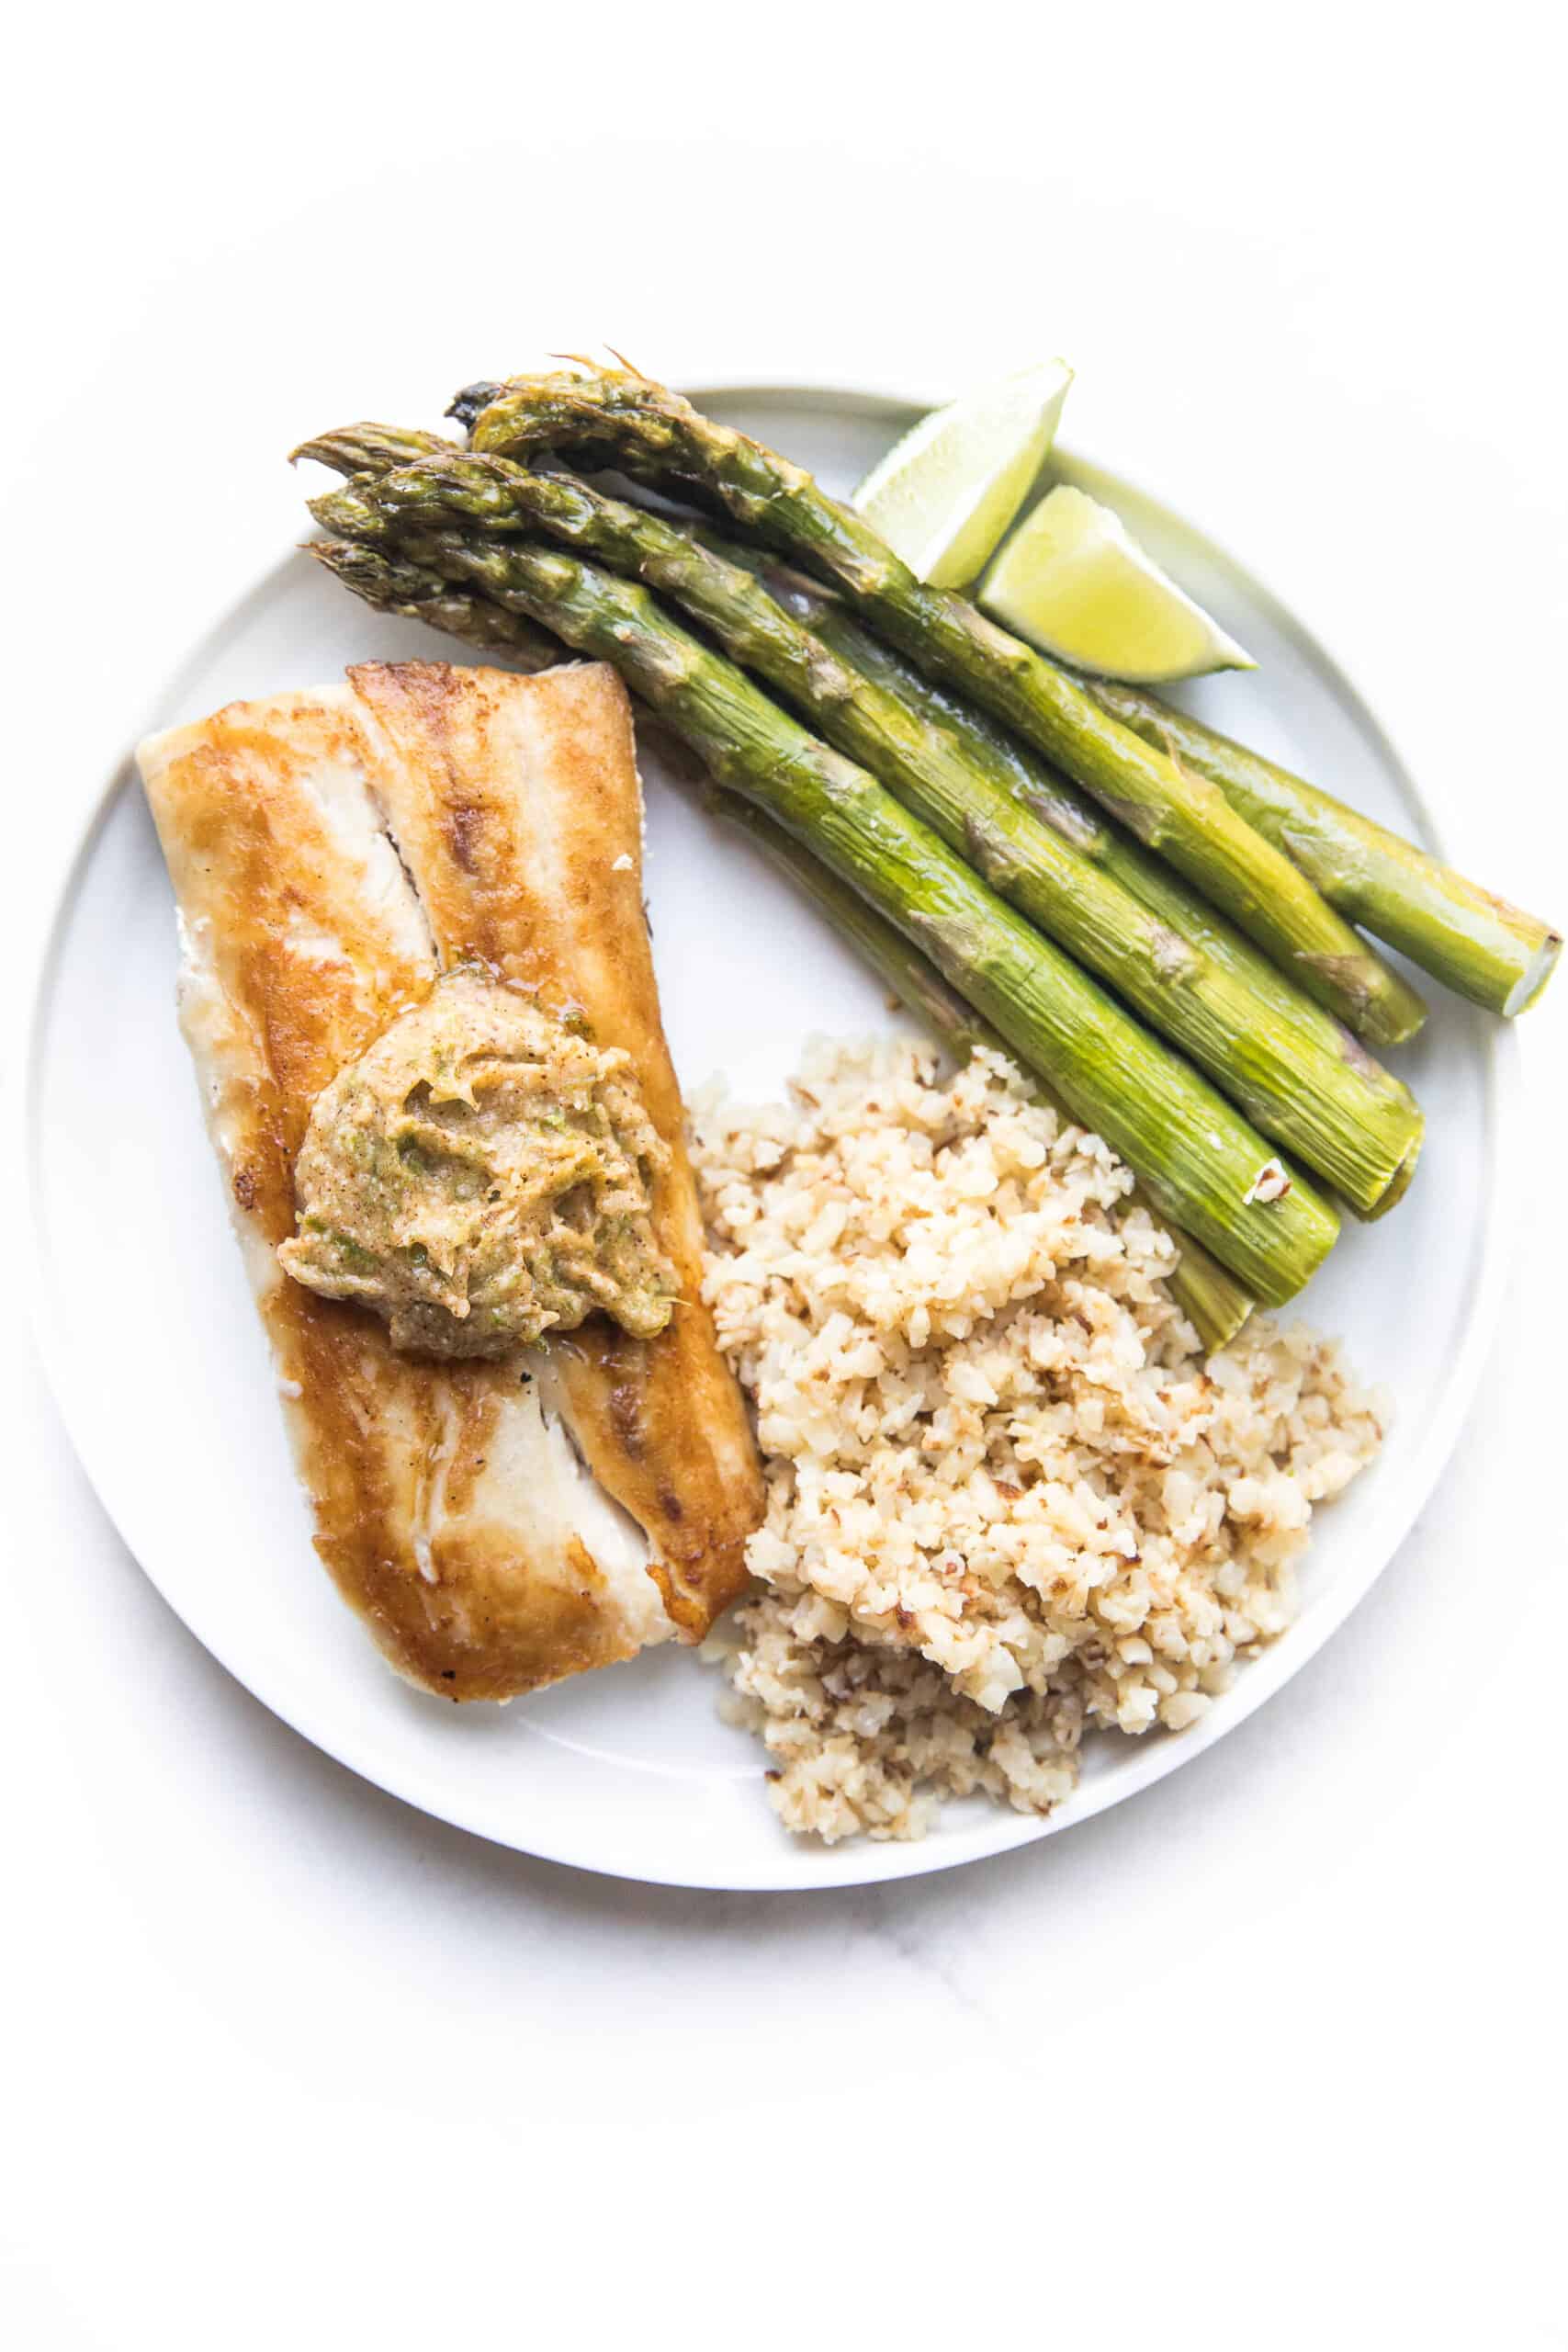 MAHI MAHI WITH CHILI LIME COMPOUND BUTTER WITH CAULIFLOWER RICE AND ASPARAGUS ON A WHITE PLATE AND BACKGROUND